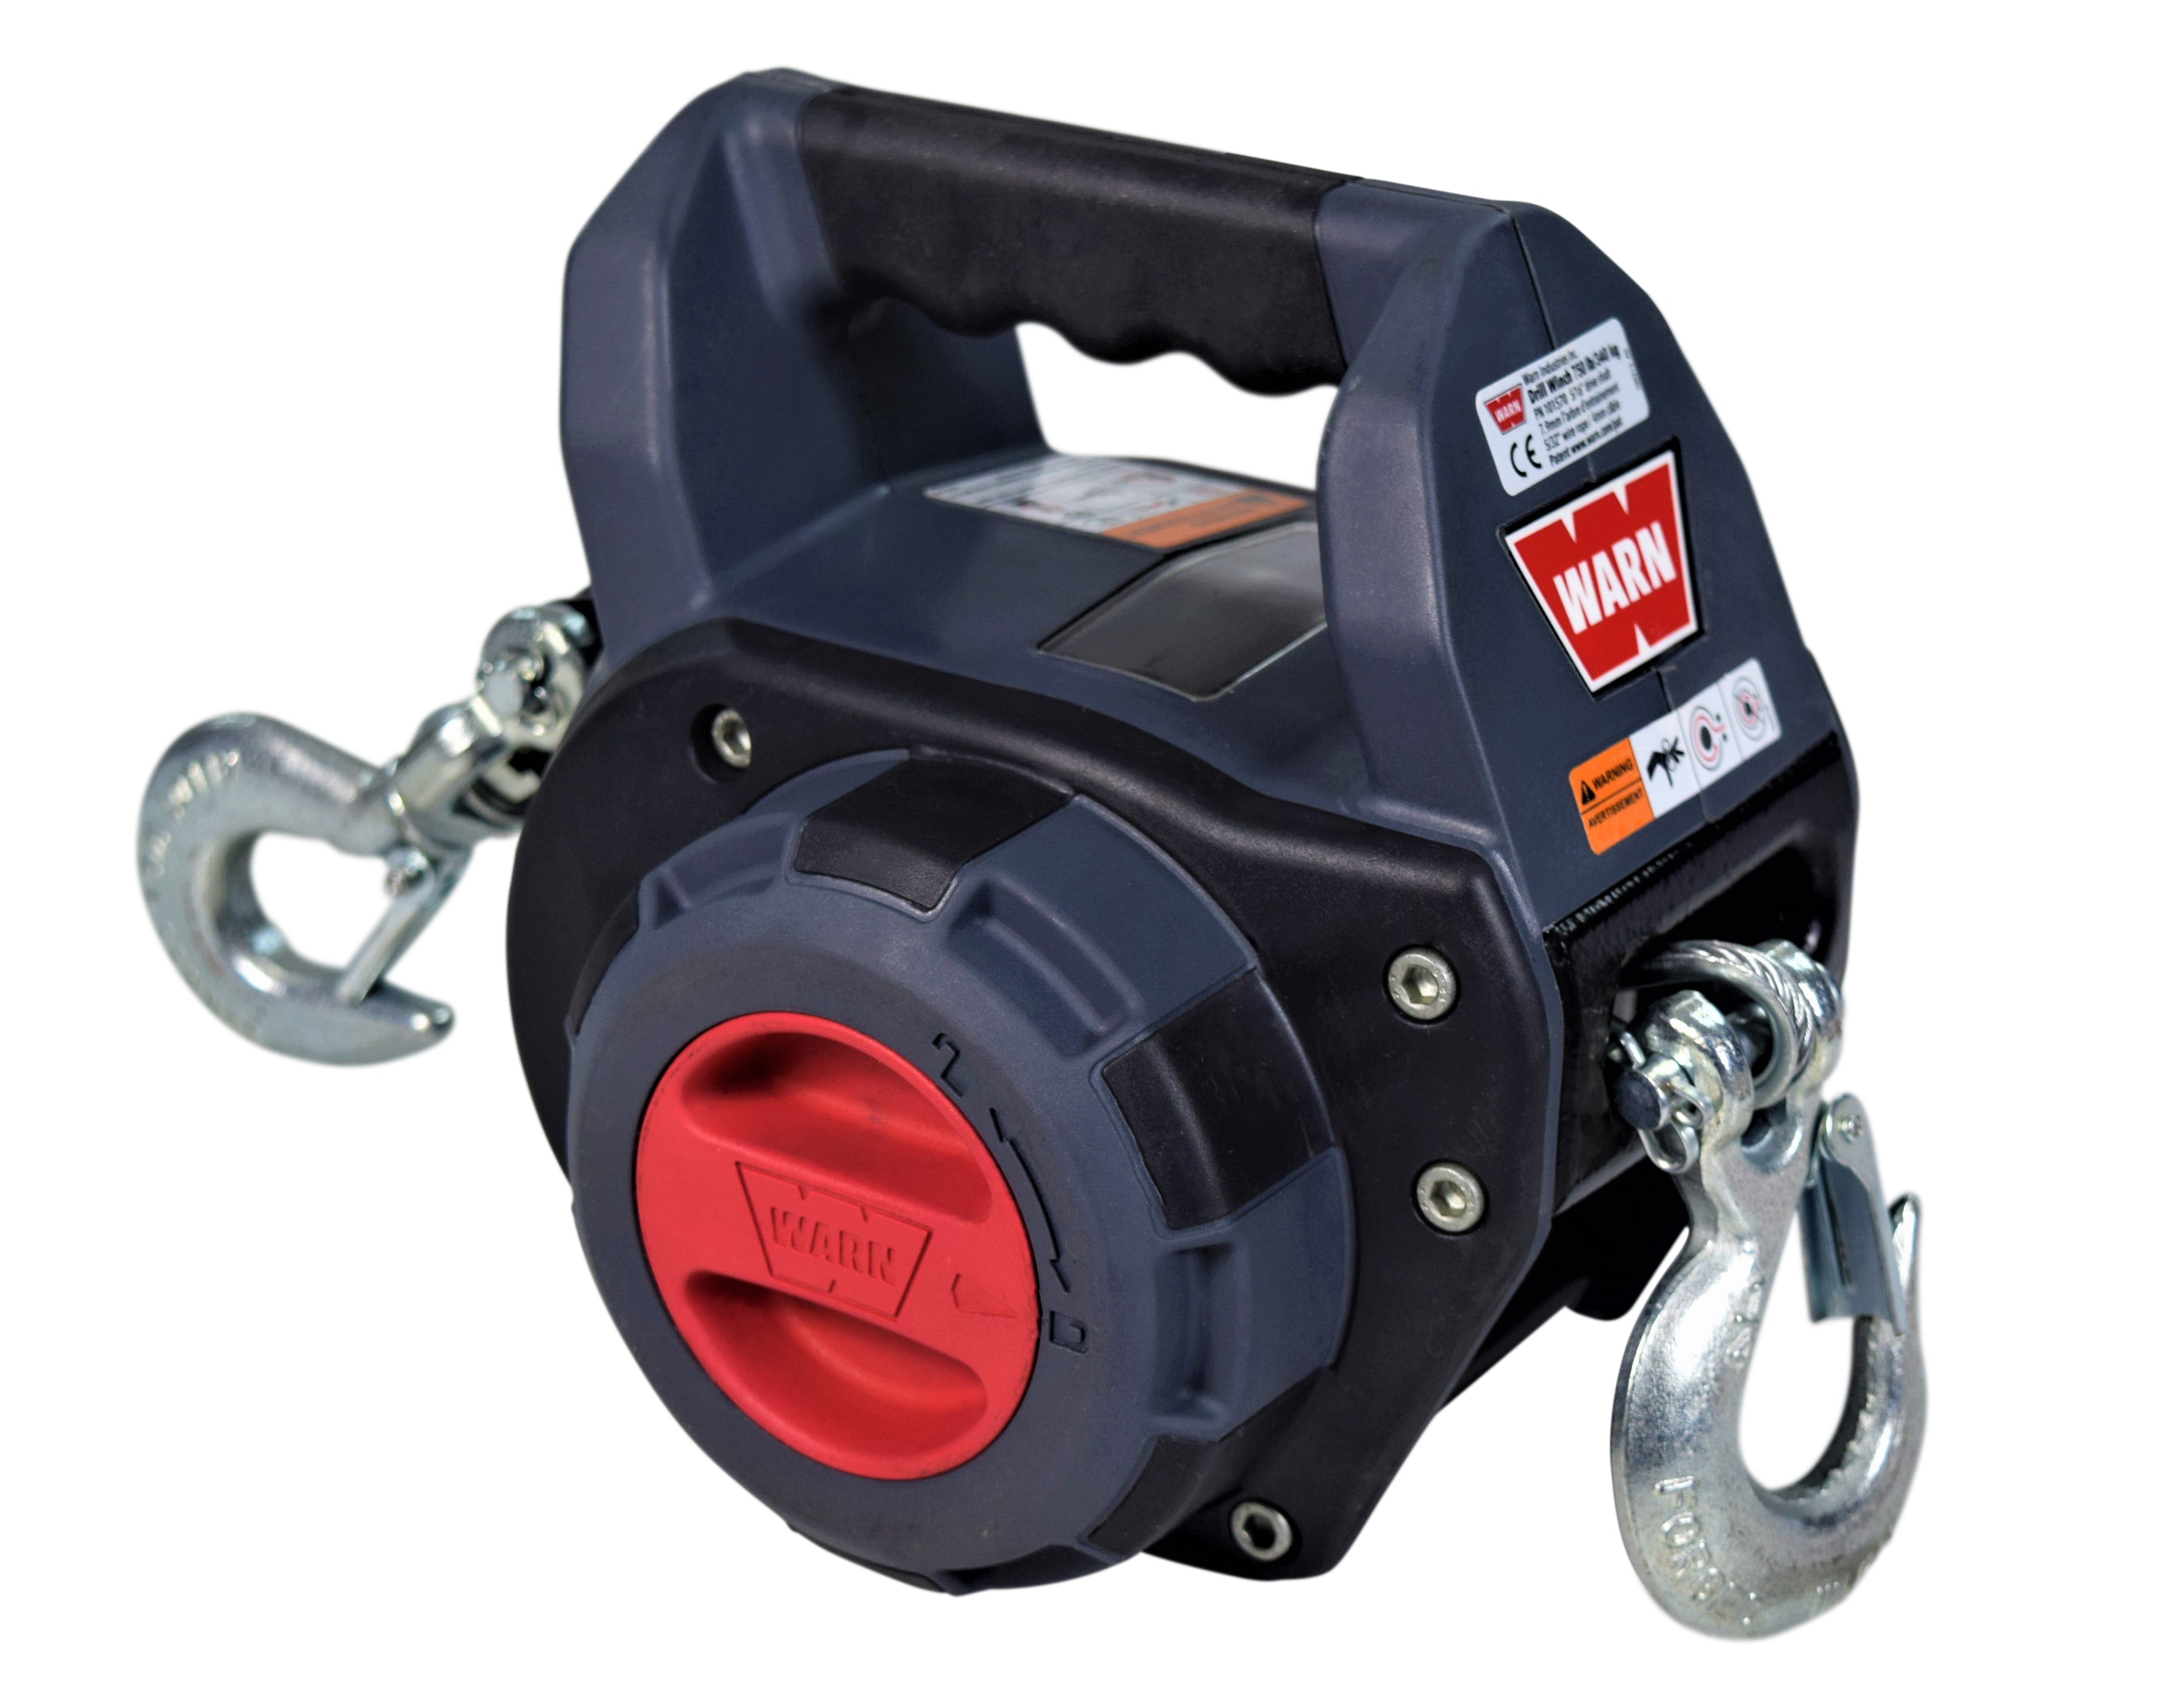 Warn Drill winch - Synthetic rope, Portable winch, Hand winch